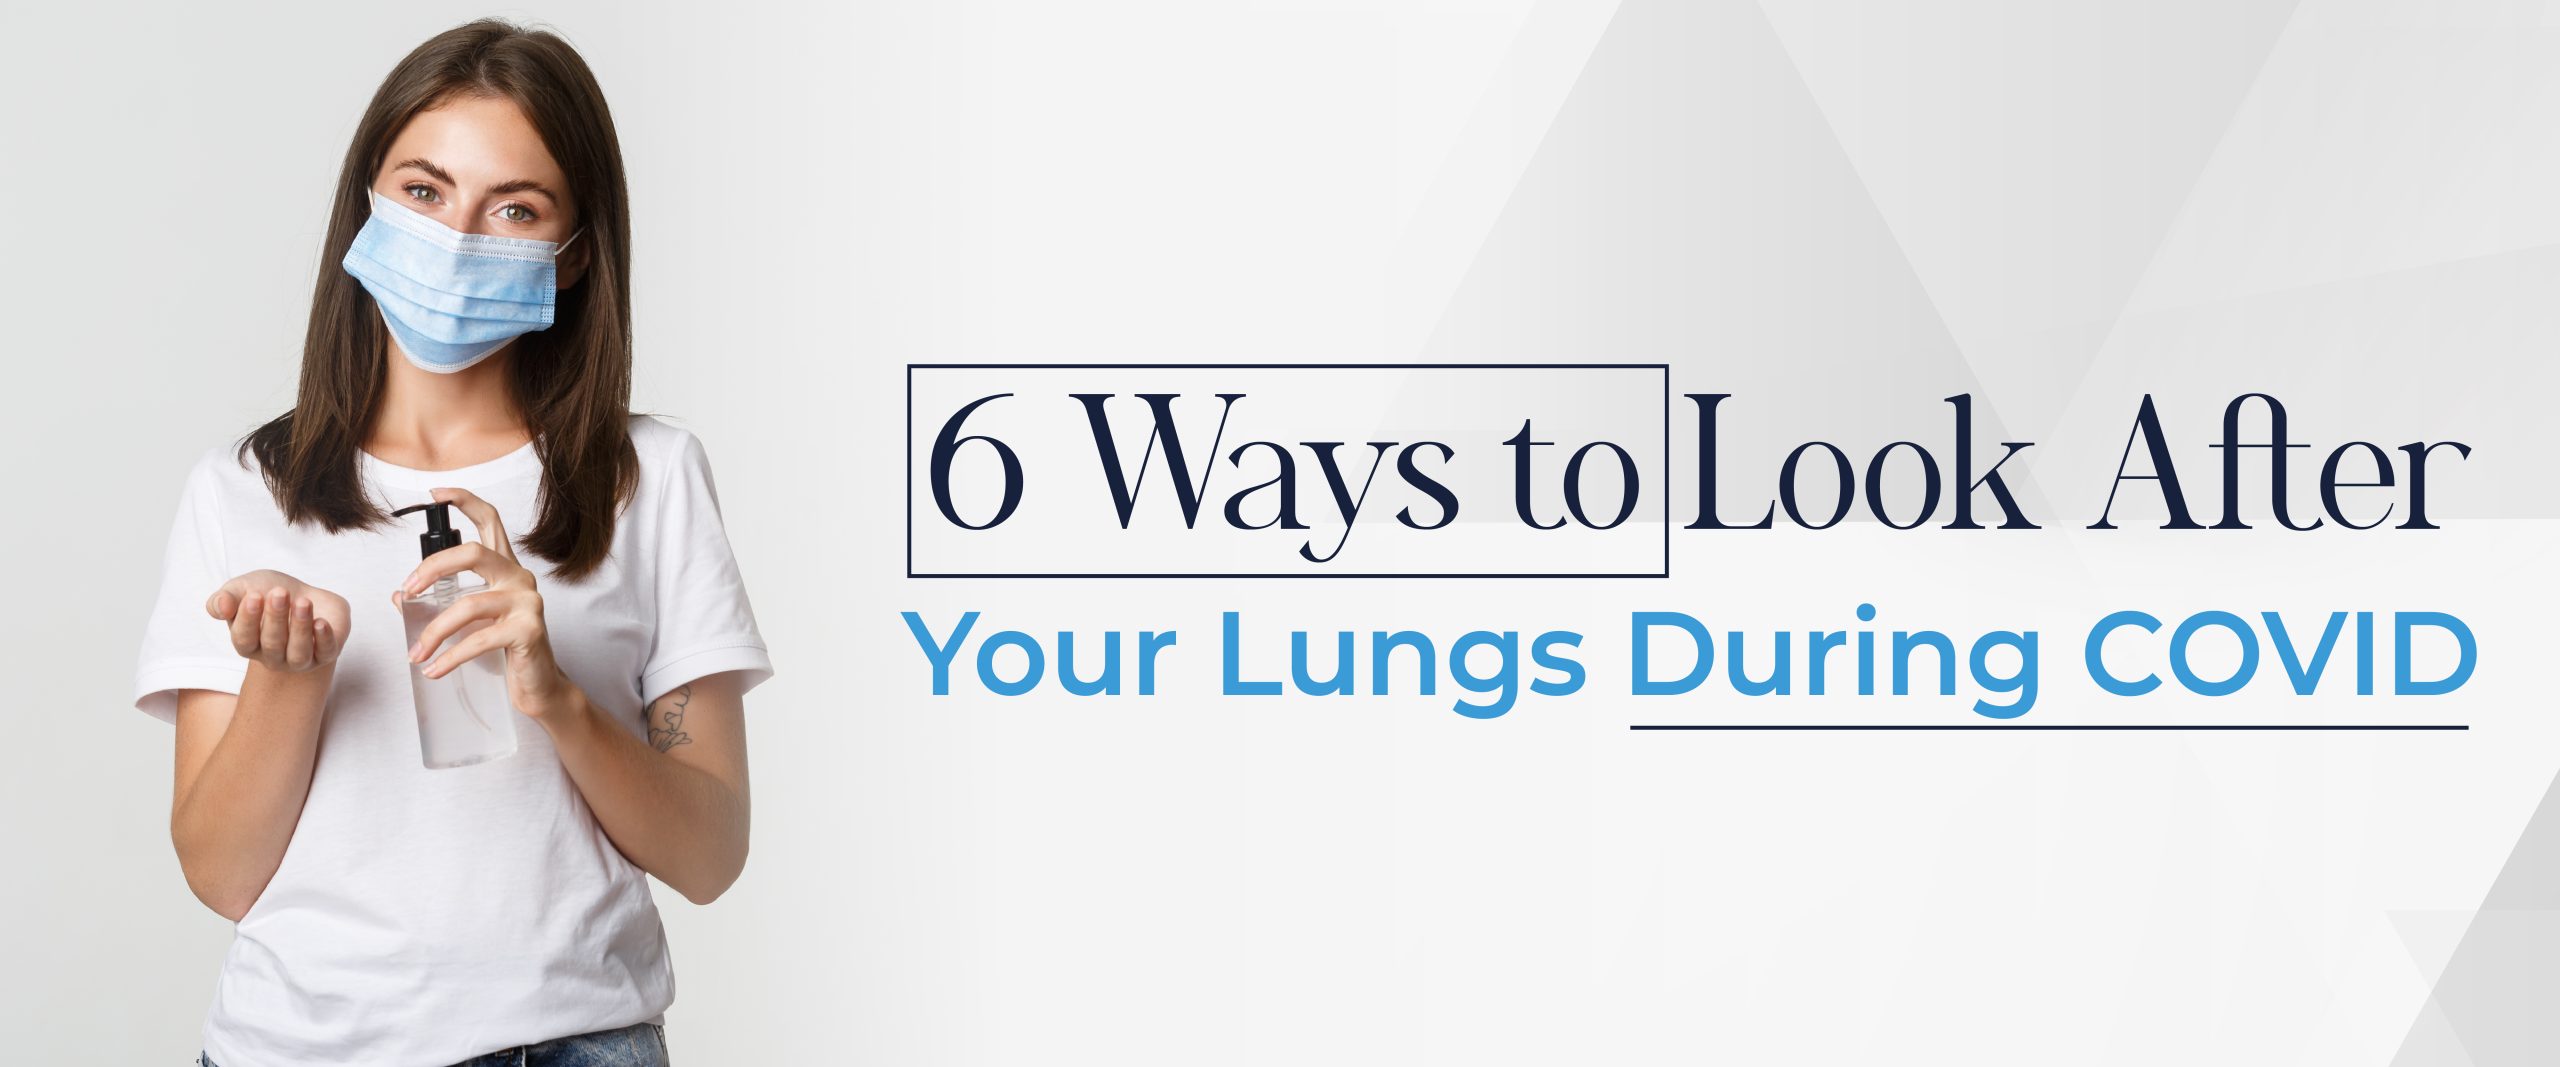 6 Ways to Look After Your Lungs During COVID